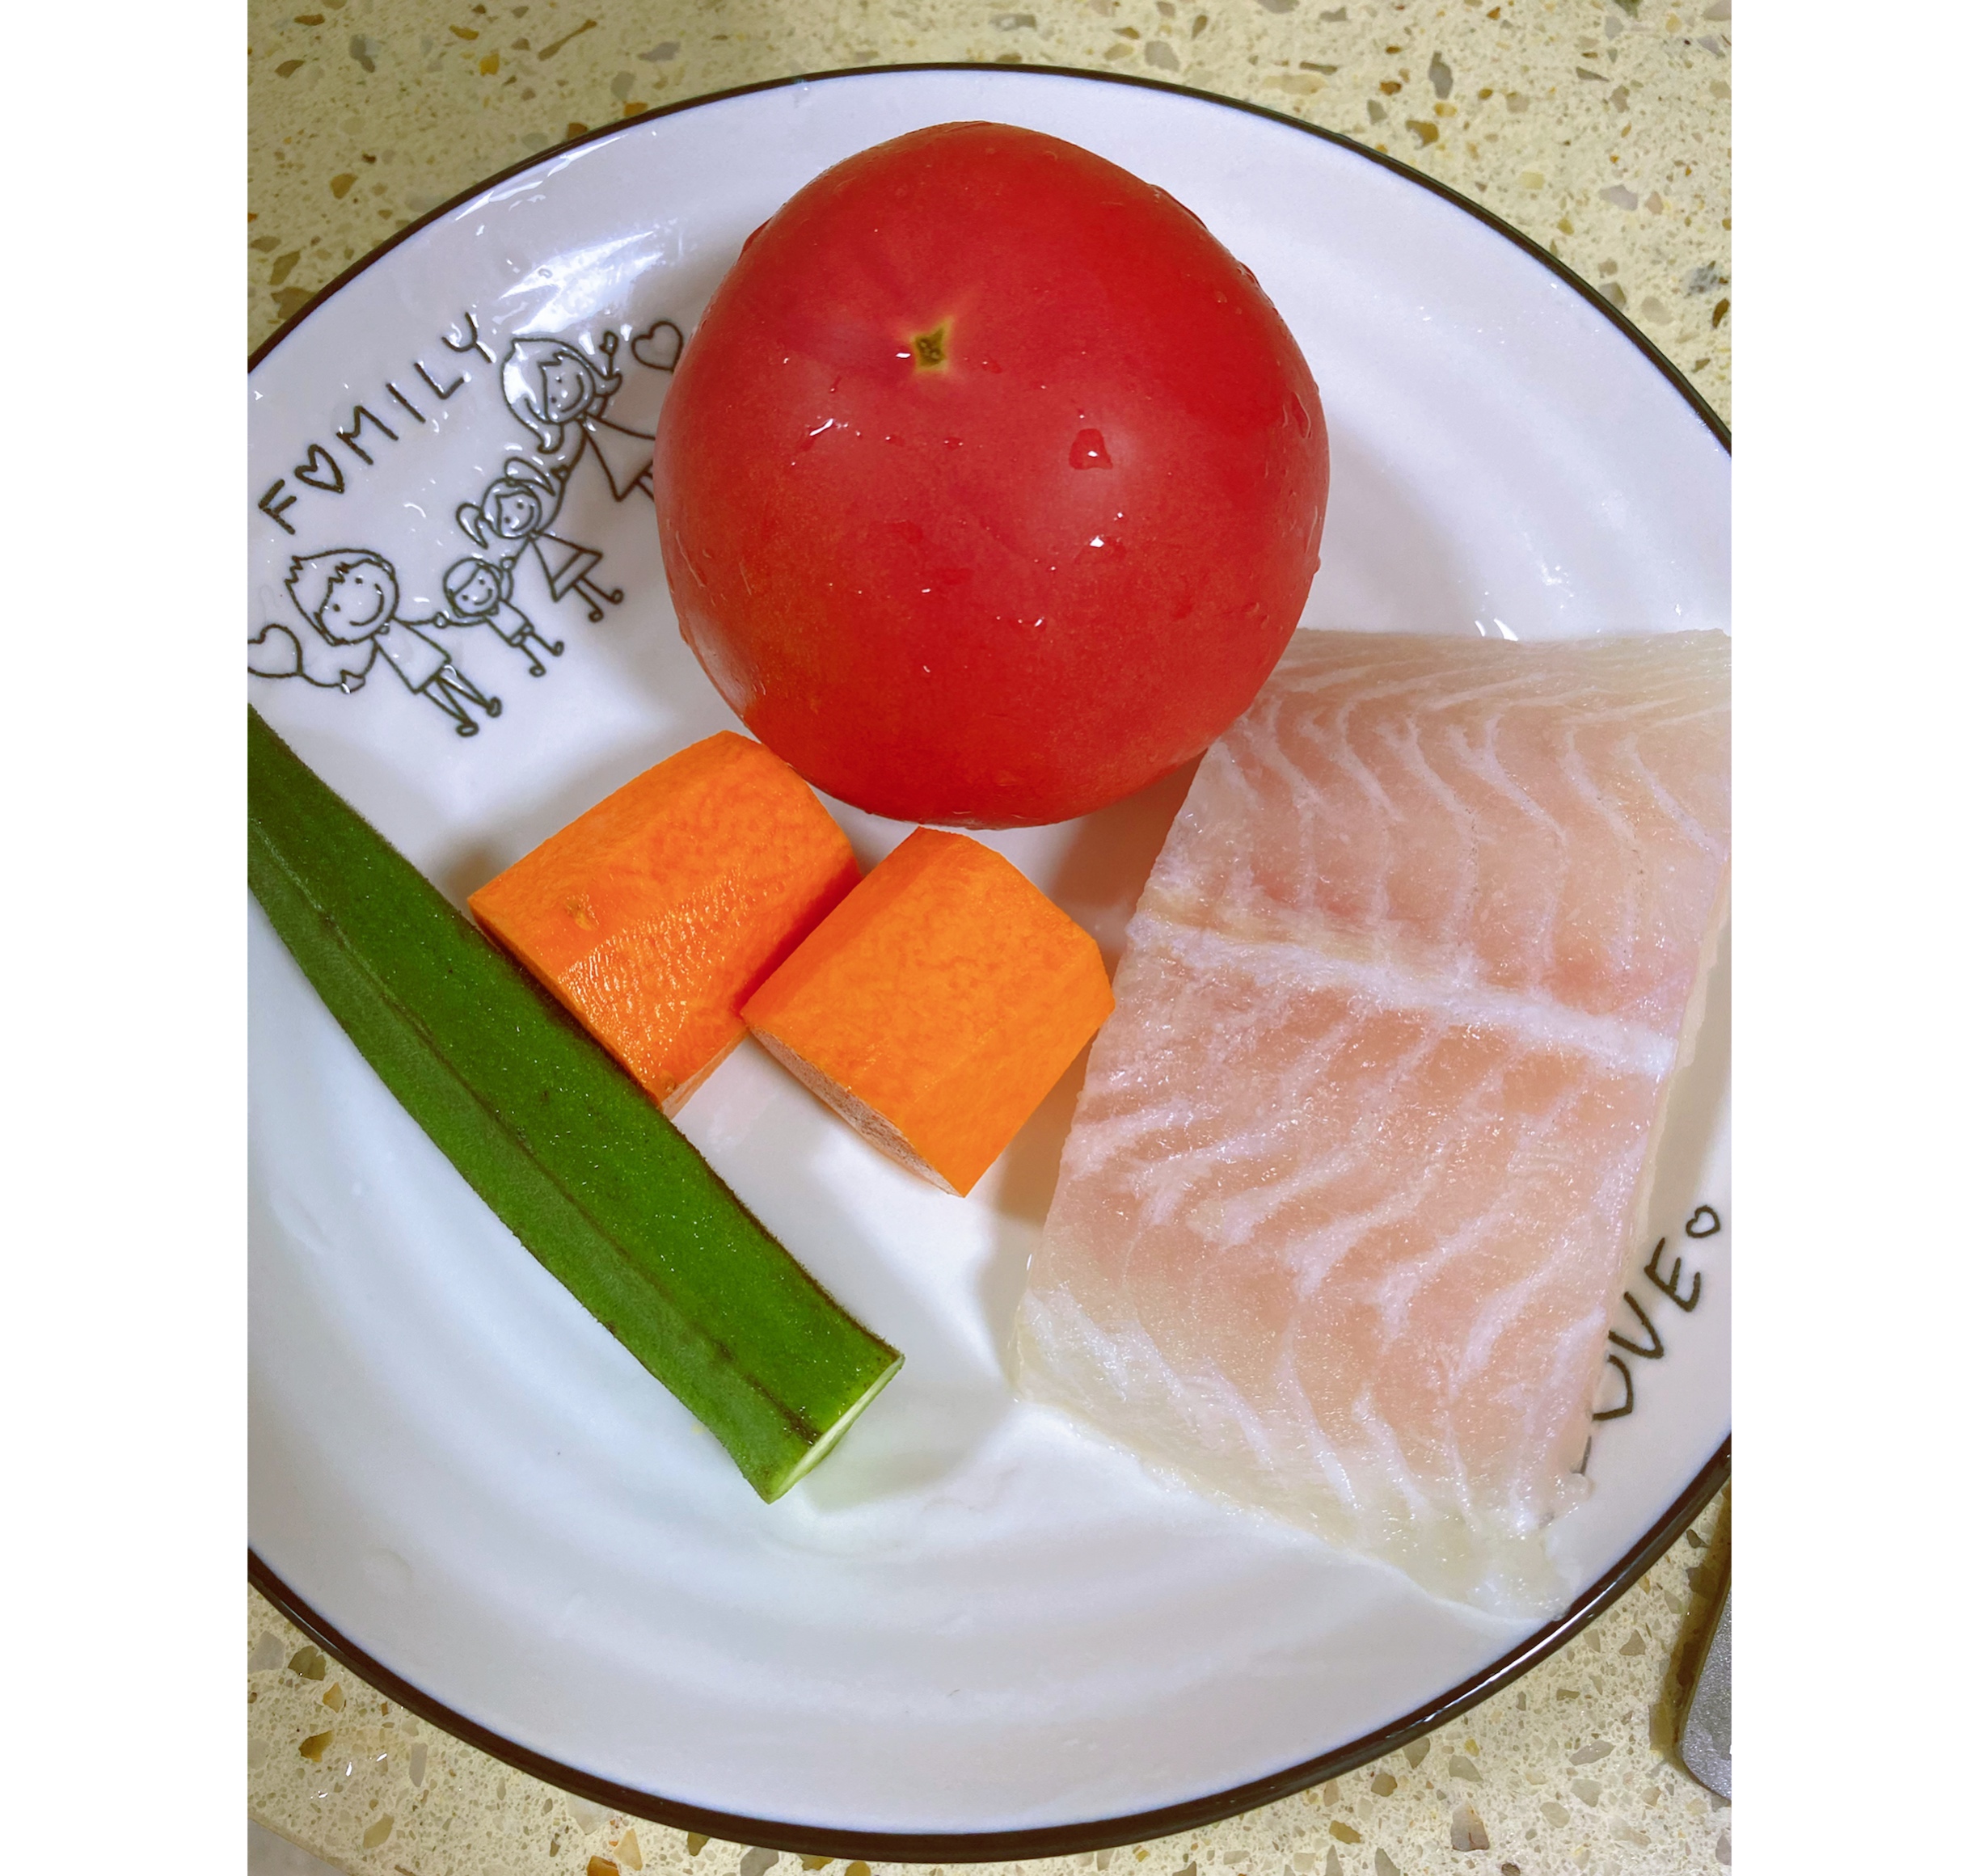 
Darling complementary feed, tomato fish bolus. The practice that tomato fish slips